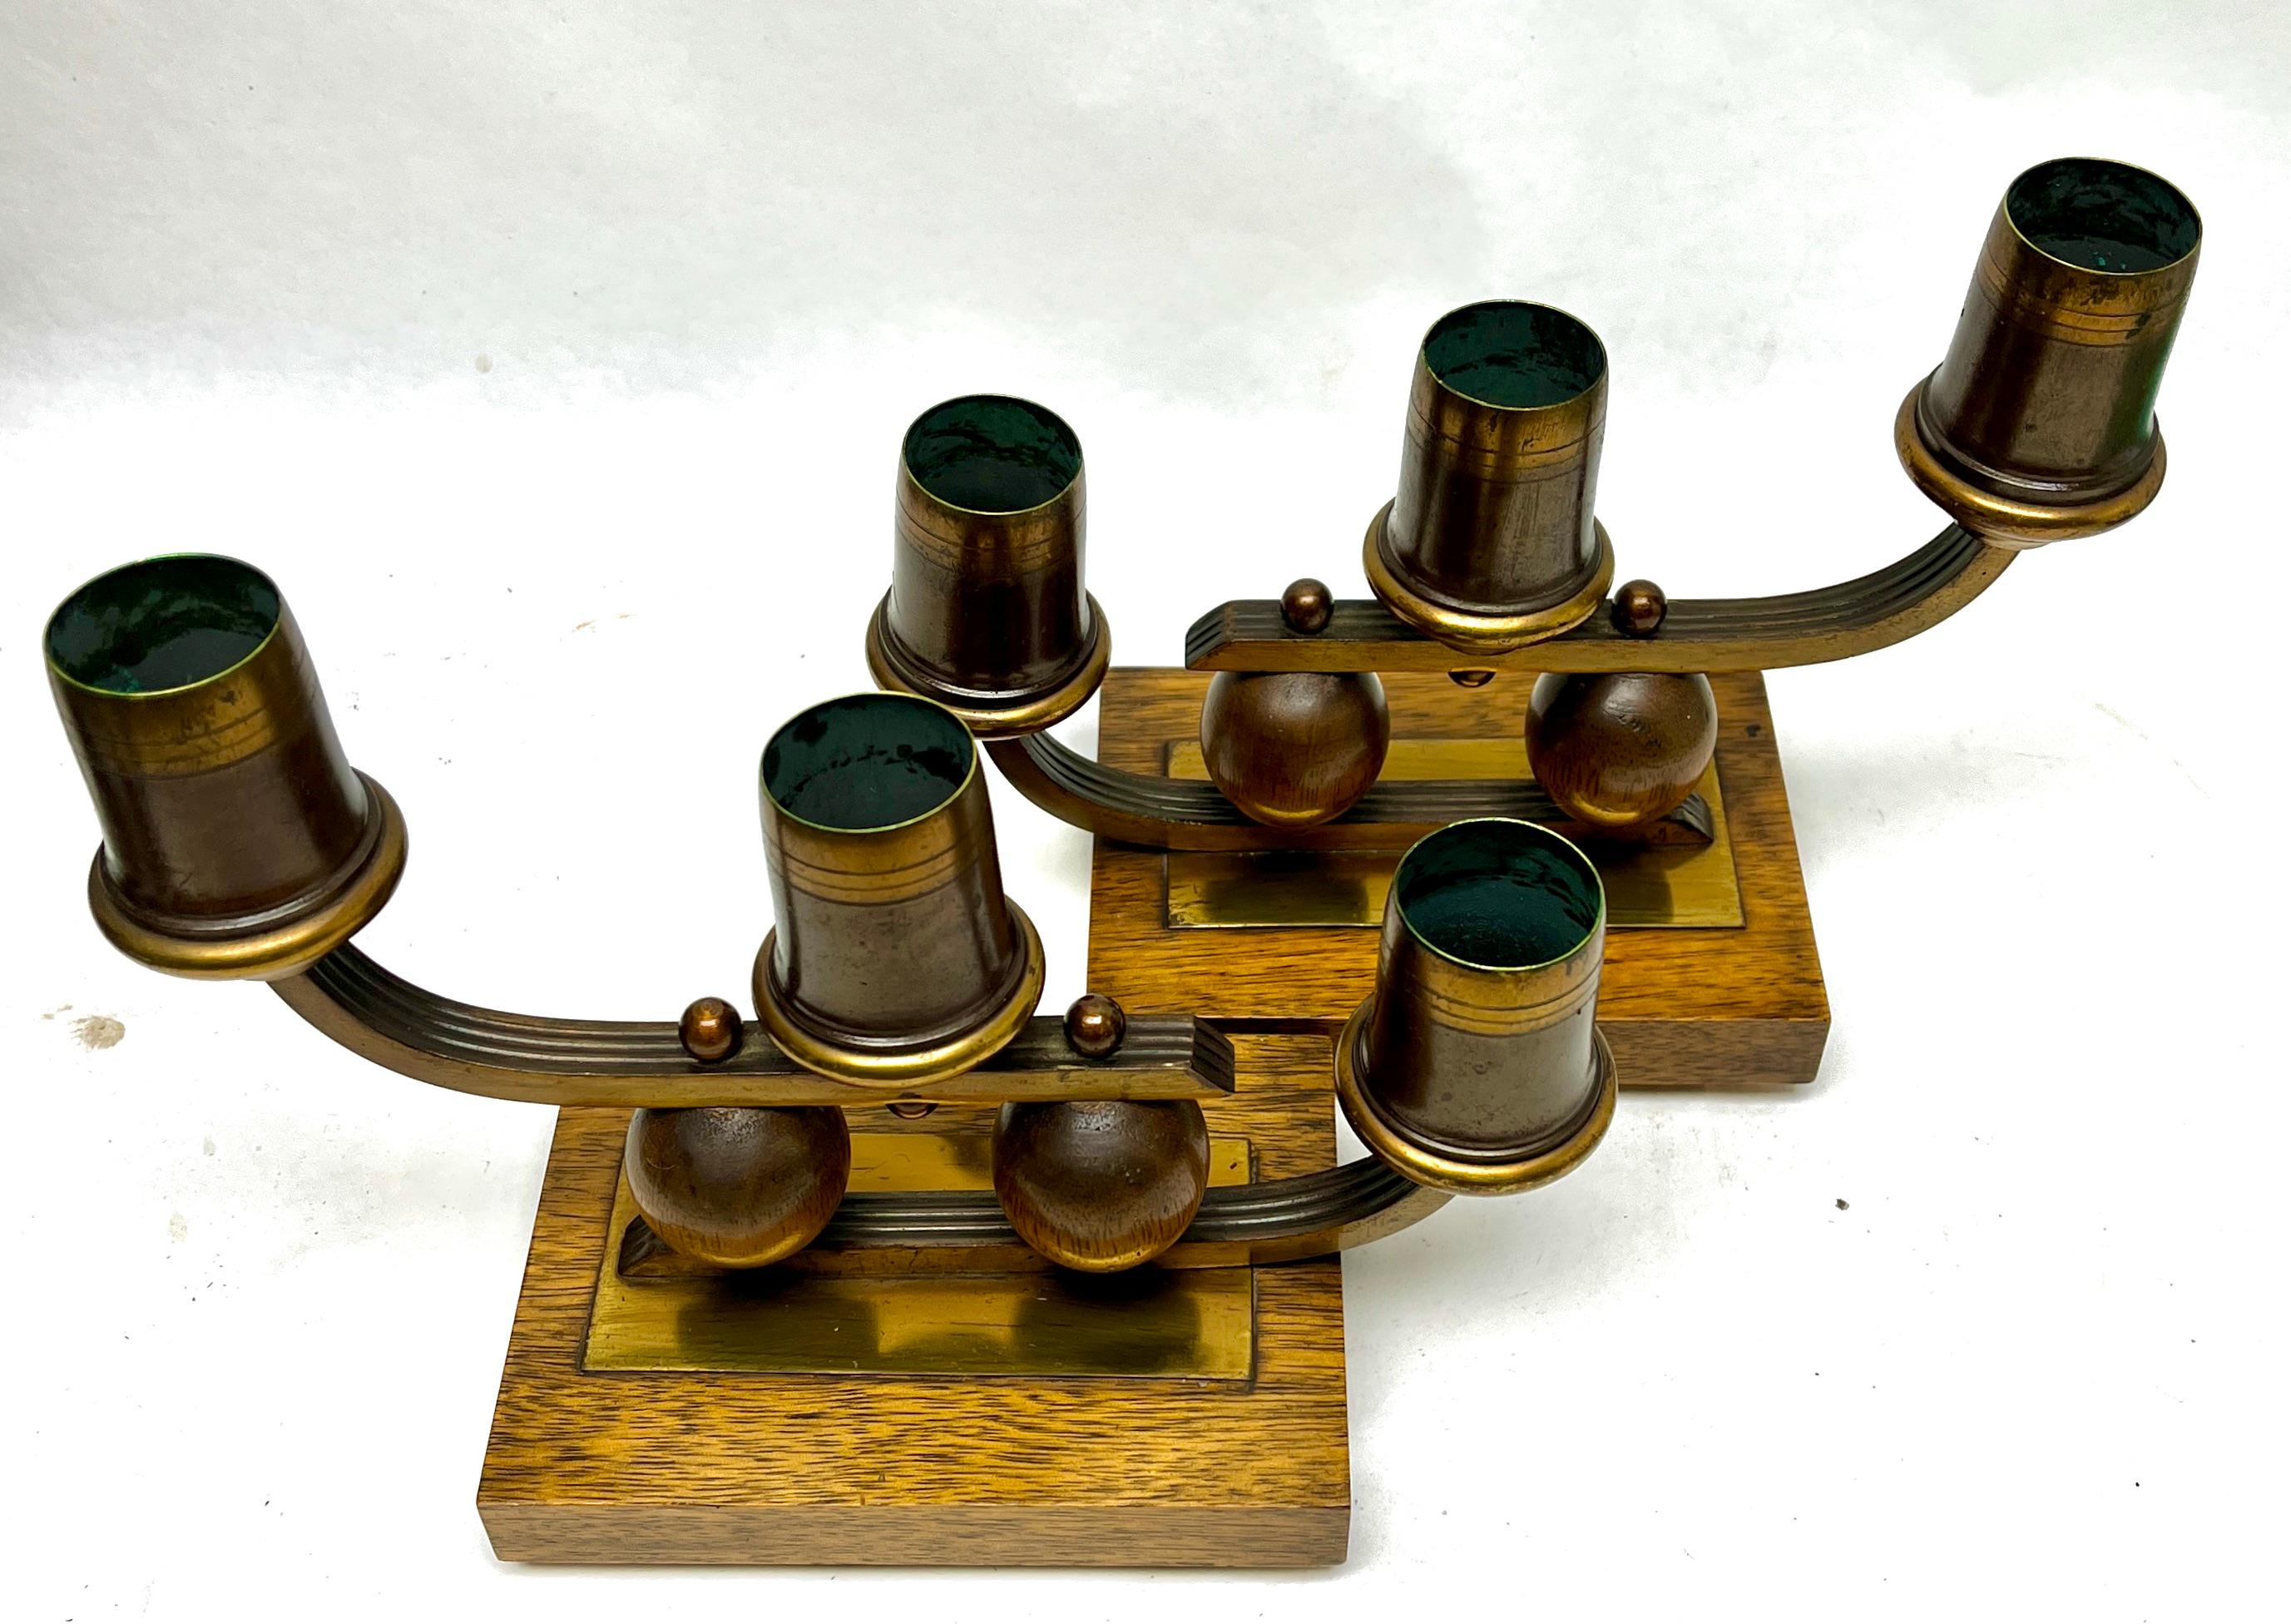 Art Deco Wooden Base and Brass Candlestick whit Wooden Details, 1930s                                                                          
Cleaned and polished the wood has also been waxed.
Original Patina

Excellent condition.
looks simply